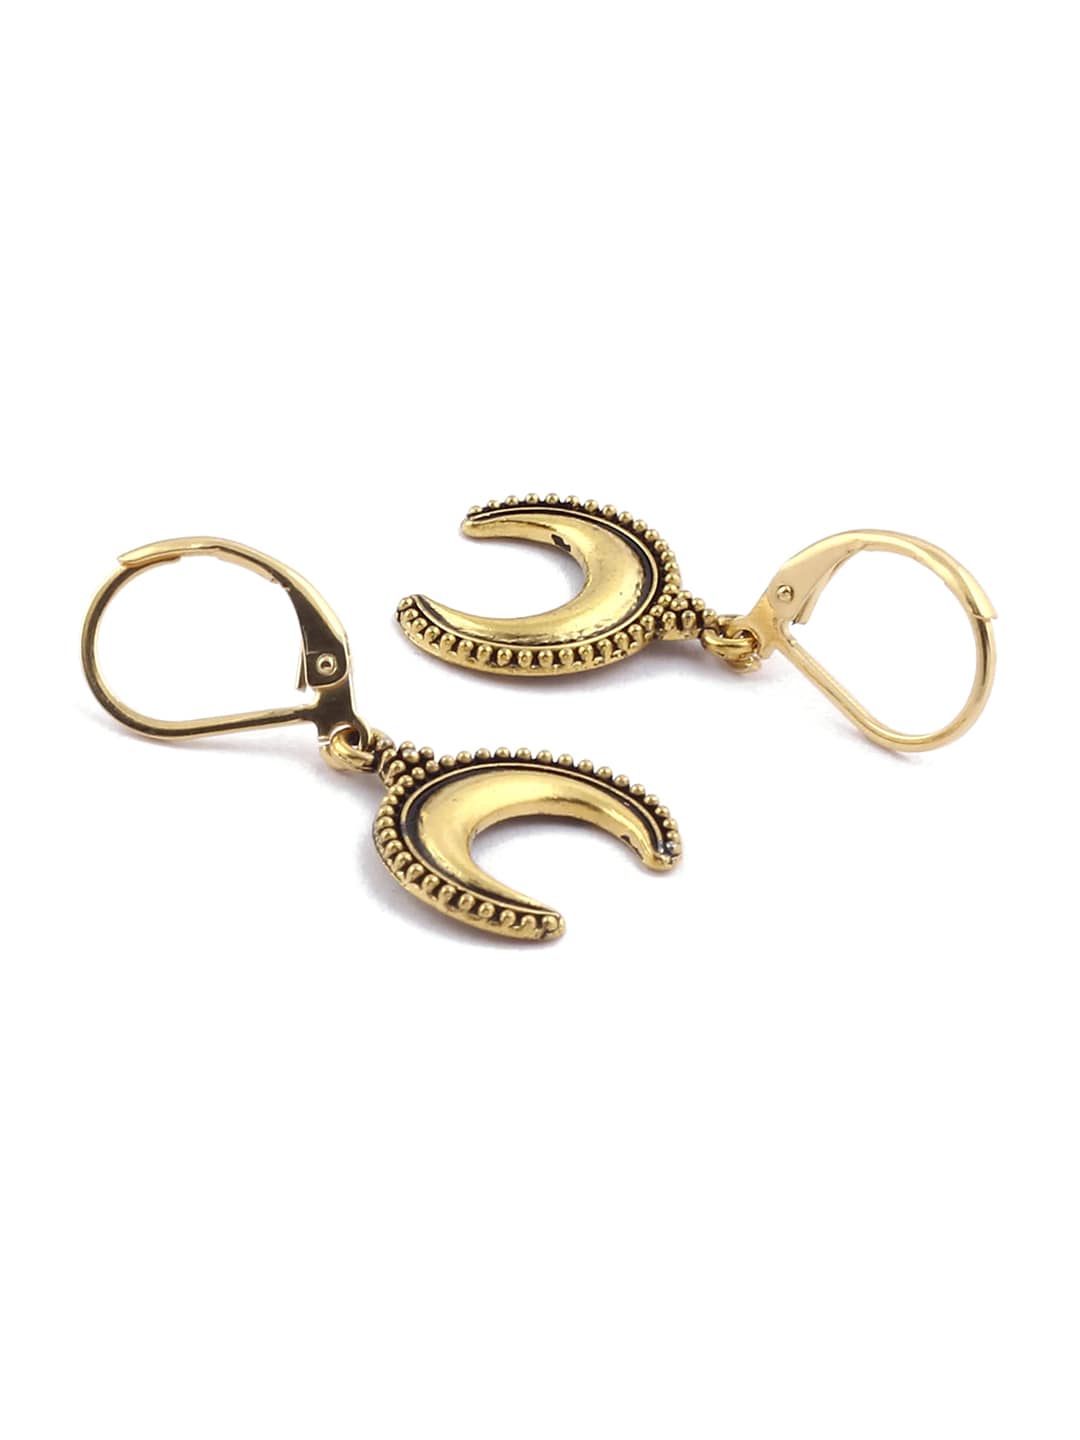 EL REGALO Gold-Toned Crescent Shaped Drop Earrings - for Women and Girls
Style ID: 17227288